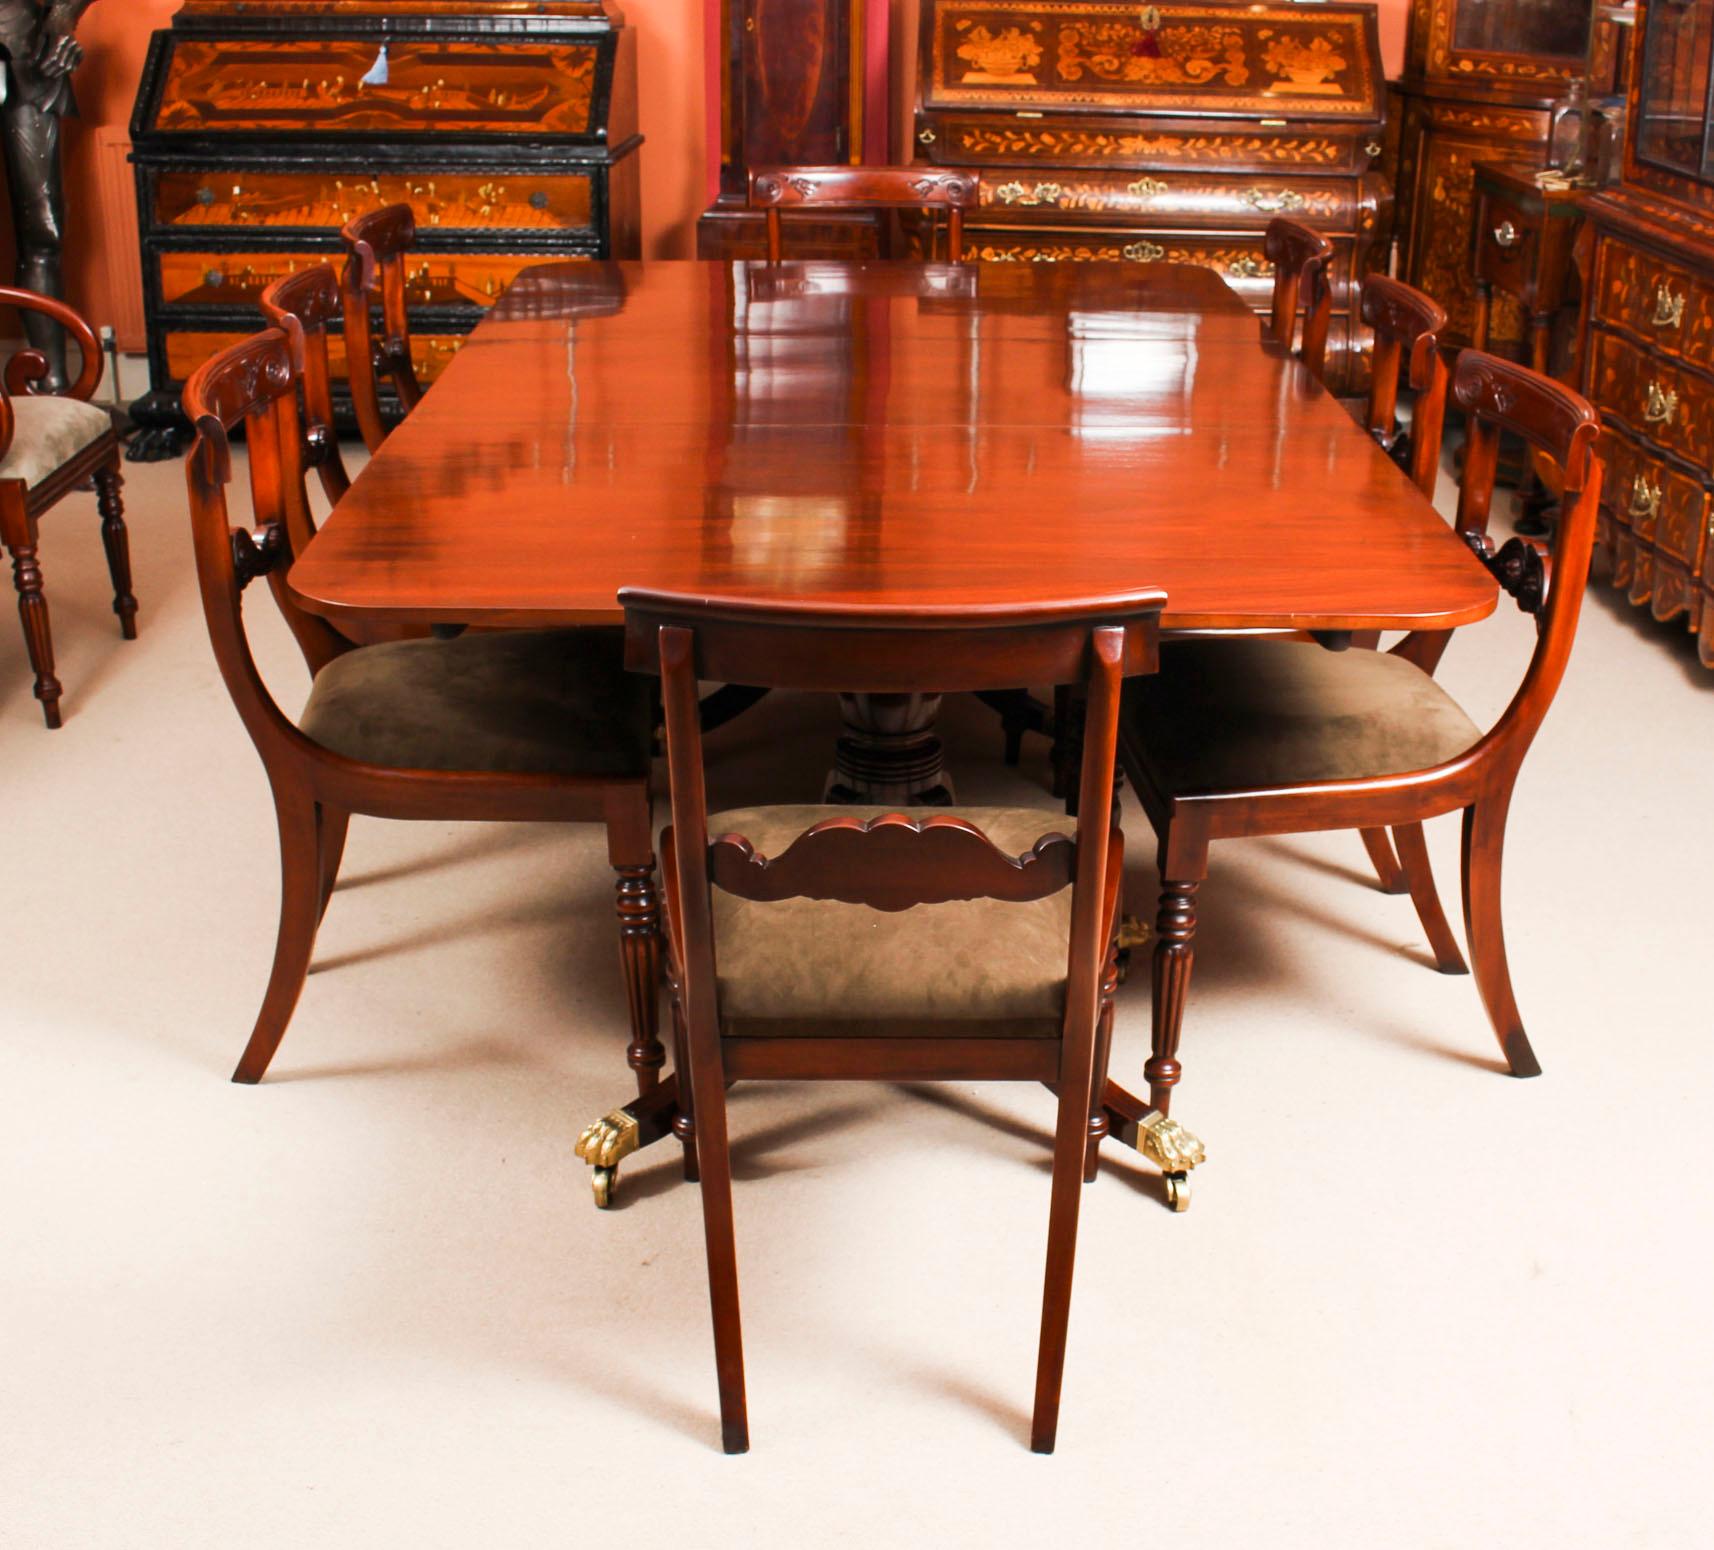 This is an elegant dining set comprising an antique Regency dining table, dating from circa 1820 and a set of bespoke dining chairs in the Regency manner.

The table has one leaf that can be added or removed as required to suit the occasion and